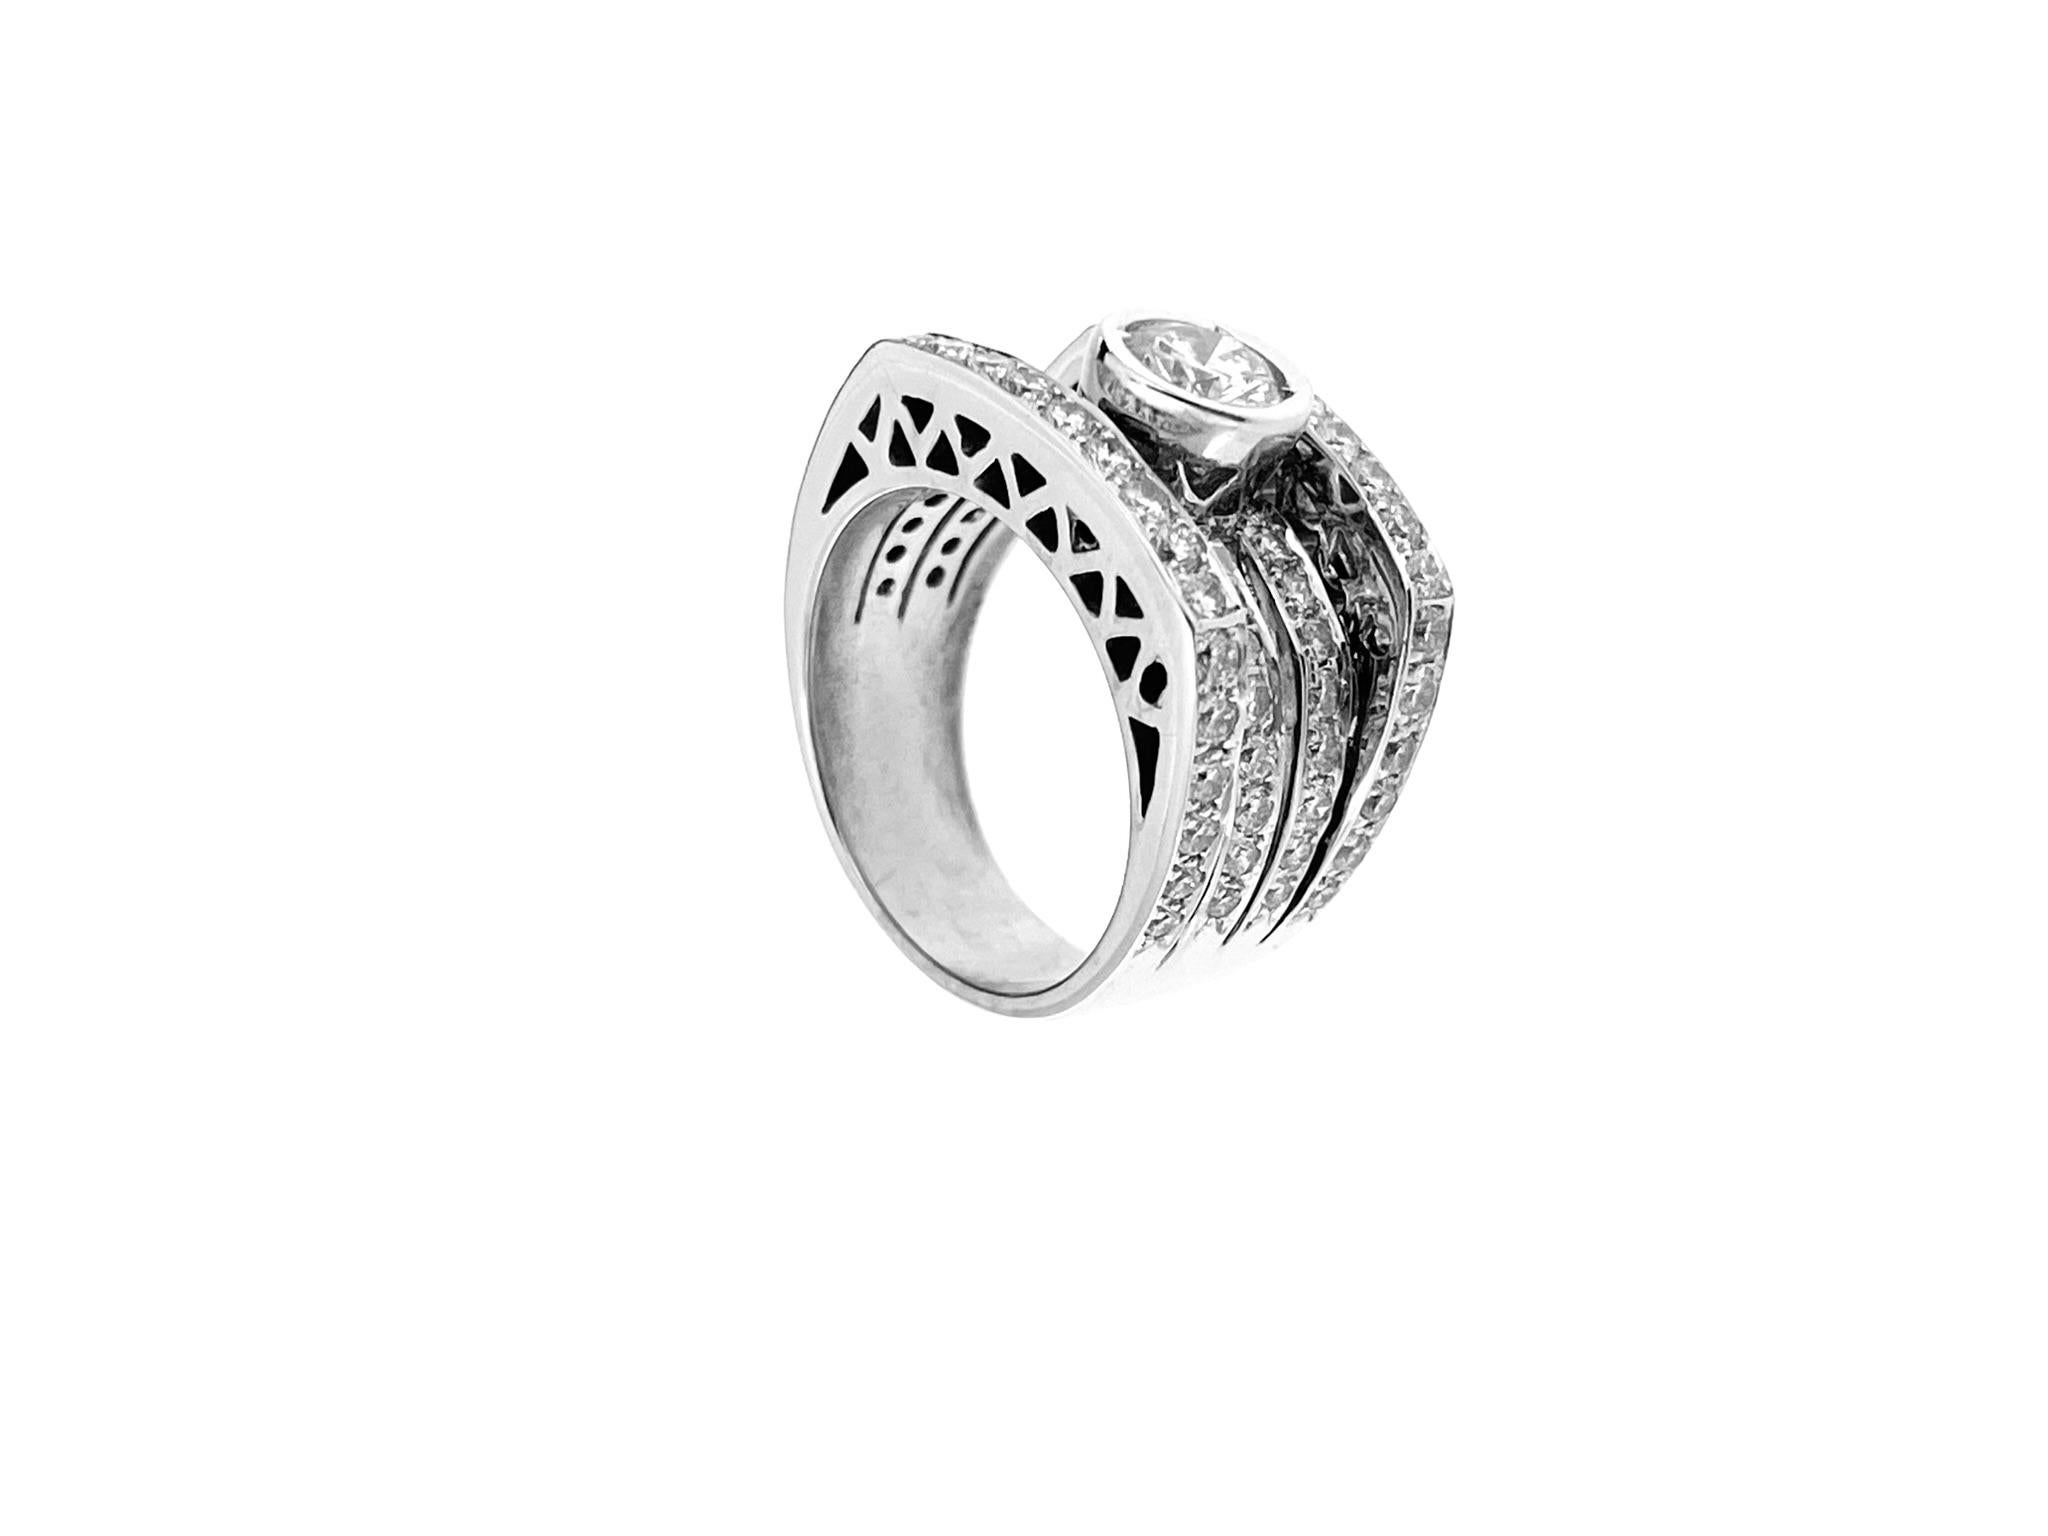 The Art Deco style Italian White Gold Ring features a blend of geometric shapes, sleek lines, and luxurious materials, typical of the Art Deco movement that flourished in the 1920s and 1930s. 

The ring is made of high-quality 18kt white gold, a